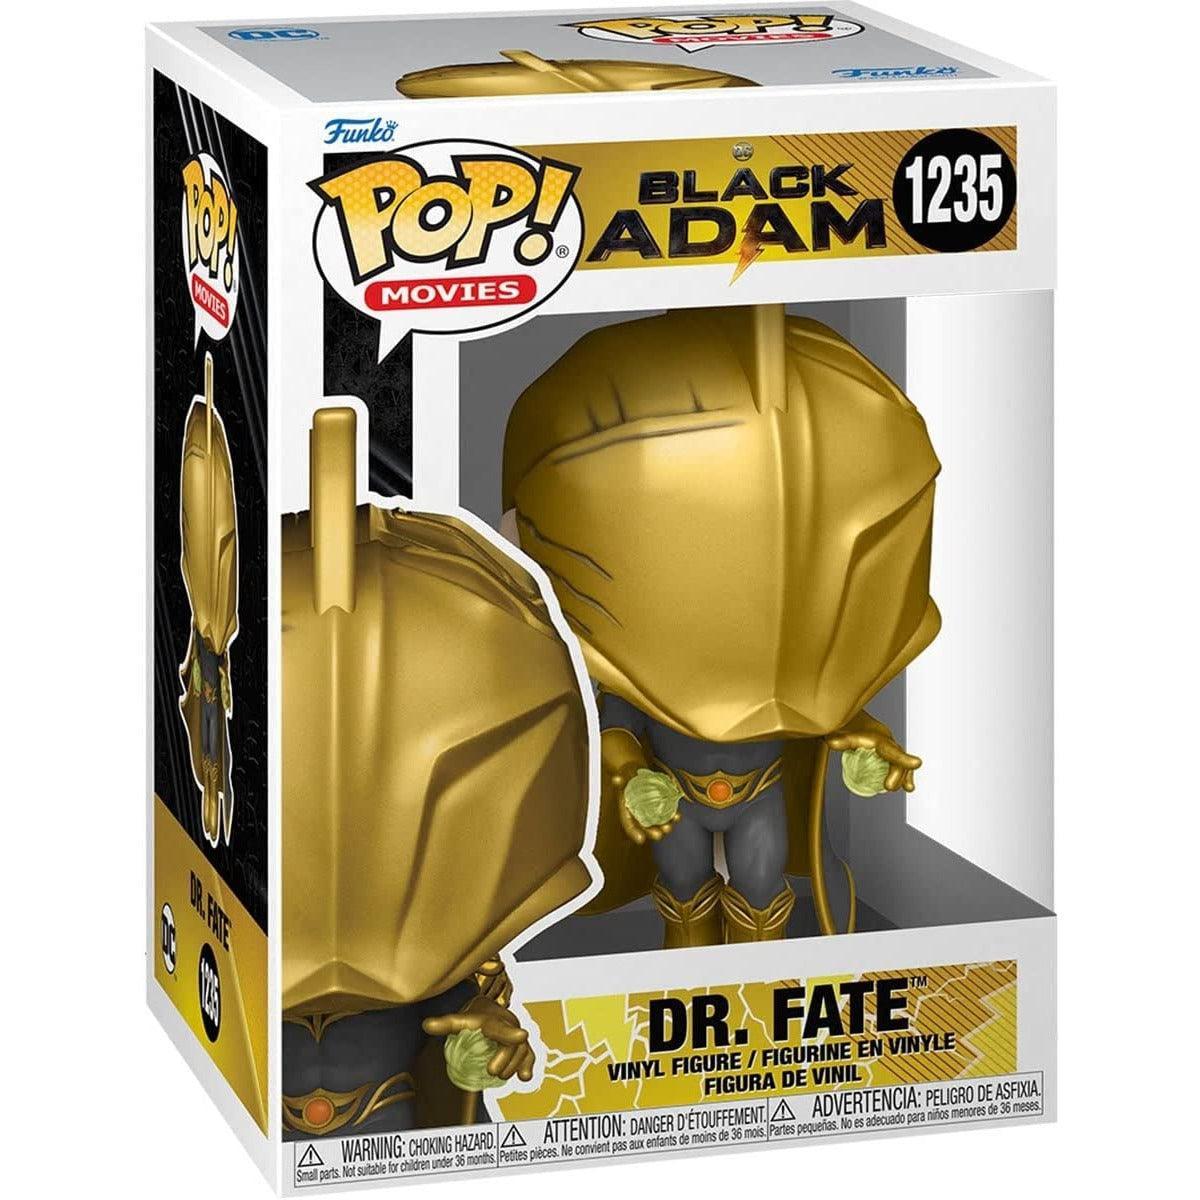 Funko Pop! Movies Black Adam - Dr. Fate - BumbleToys - 18+, 4+ Years, 6+ Years, 8+ Years, Action Figures, Black Adam, Boys, Characters, Figures, Funko, Pre-Order